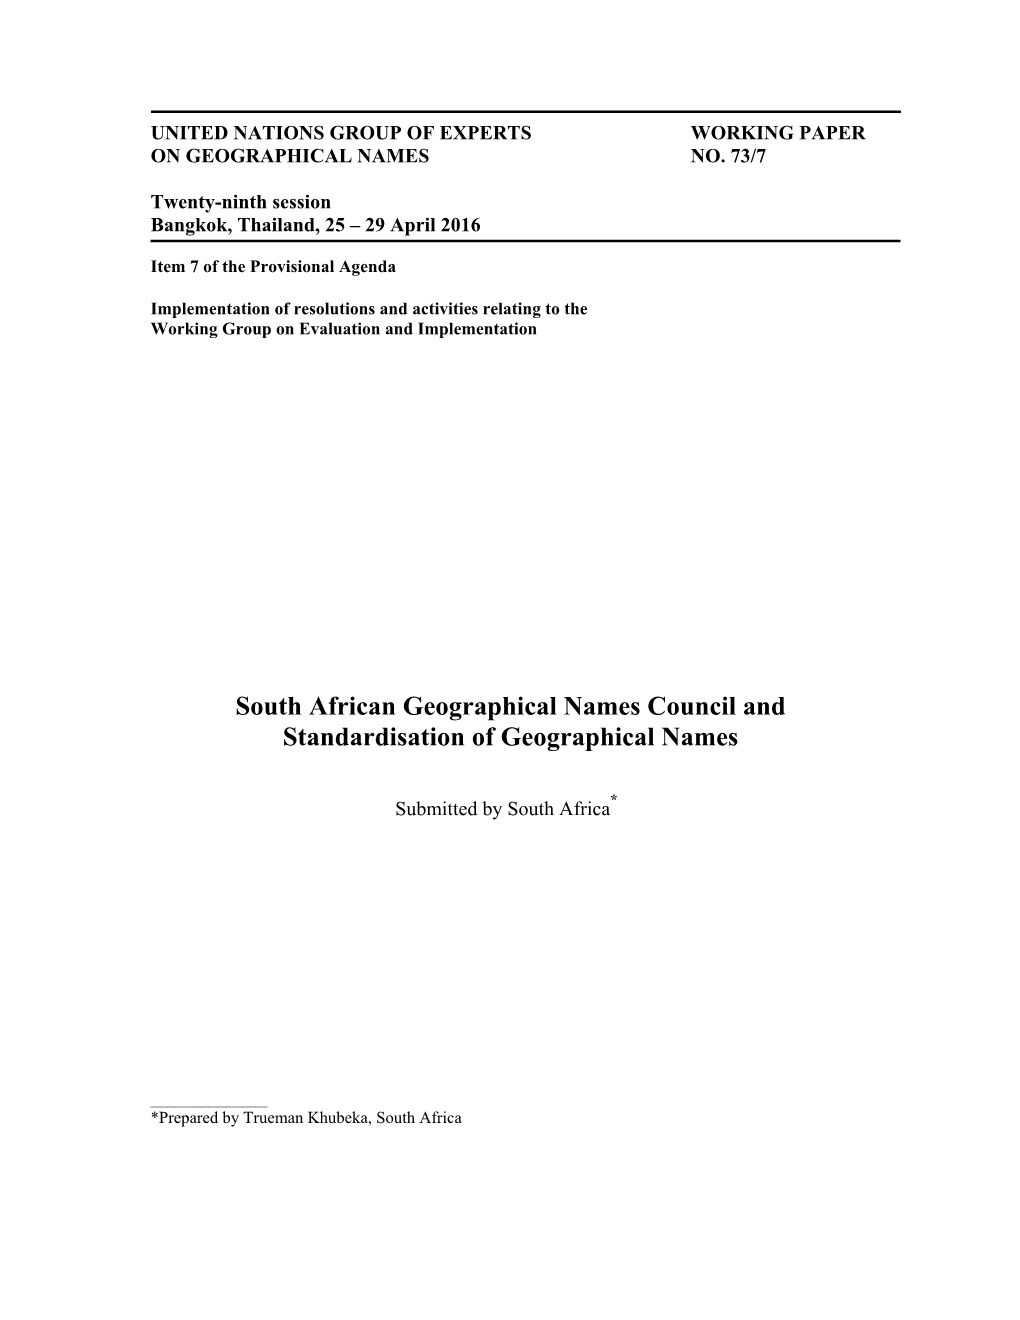 South African Geographical Names Council and Standardisation of Geographical Names